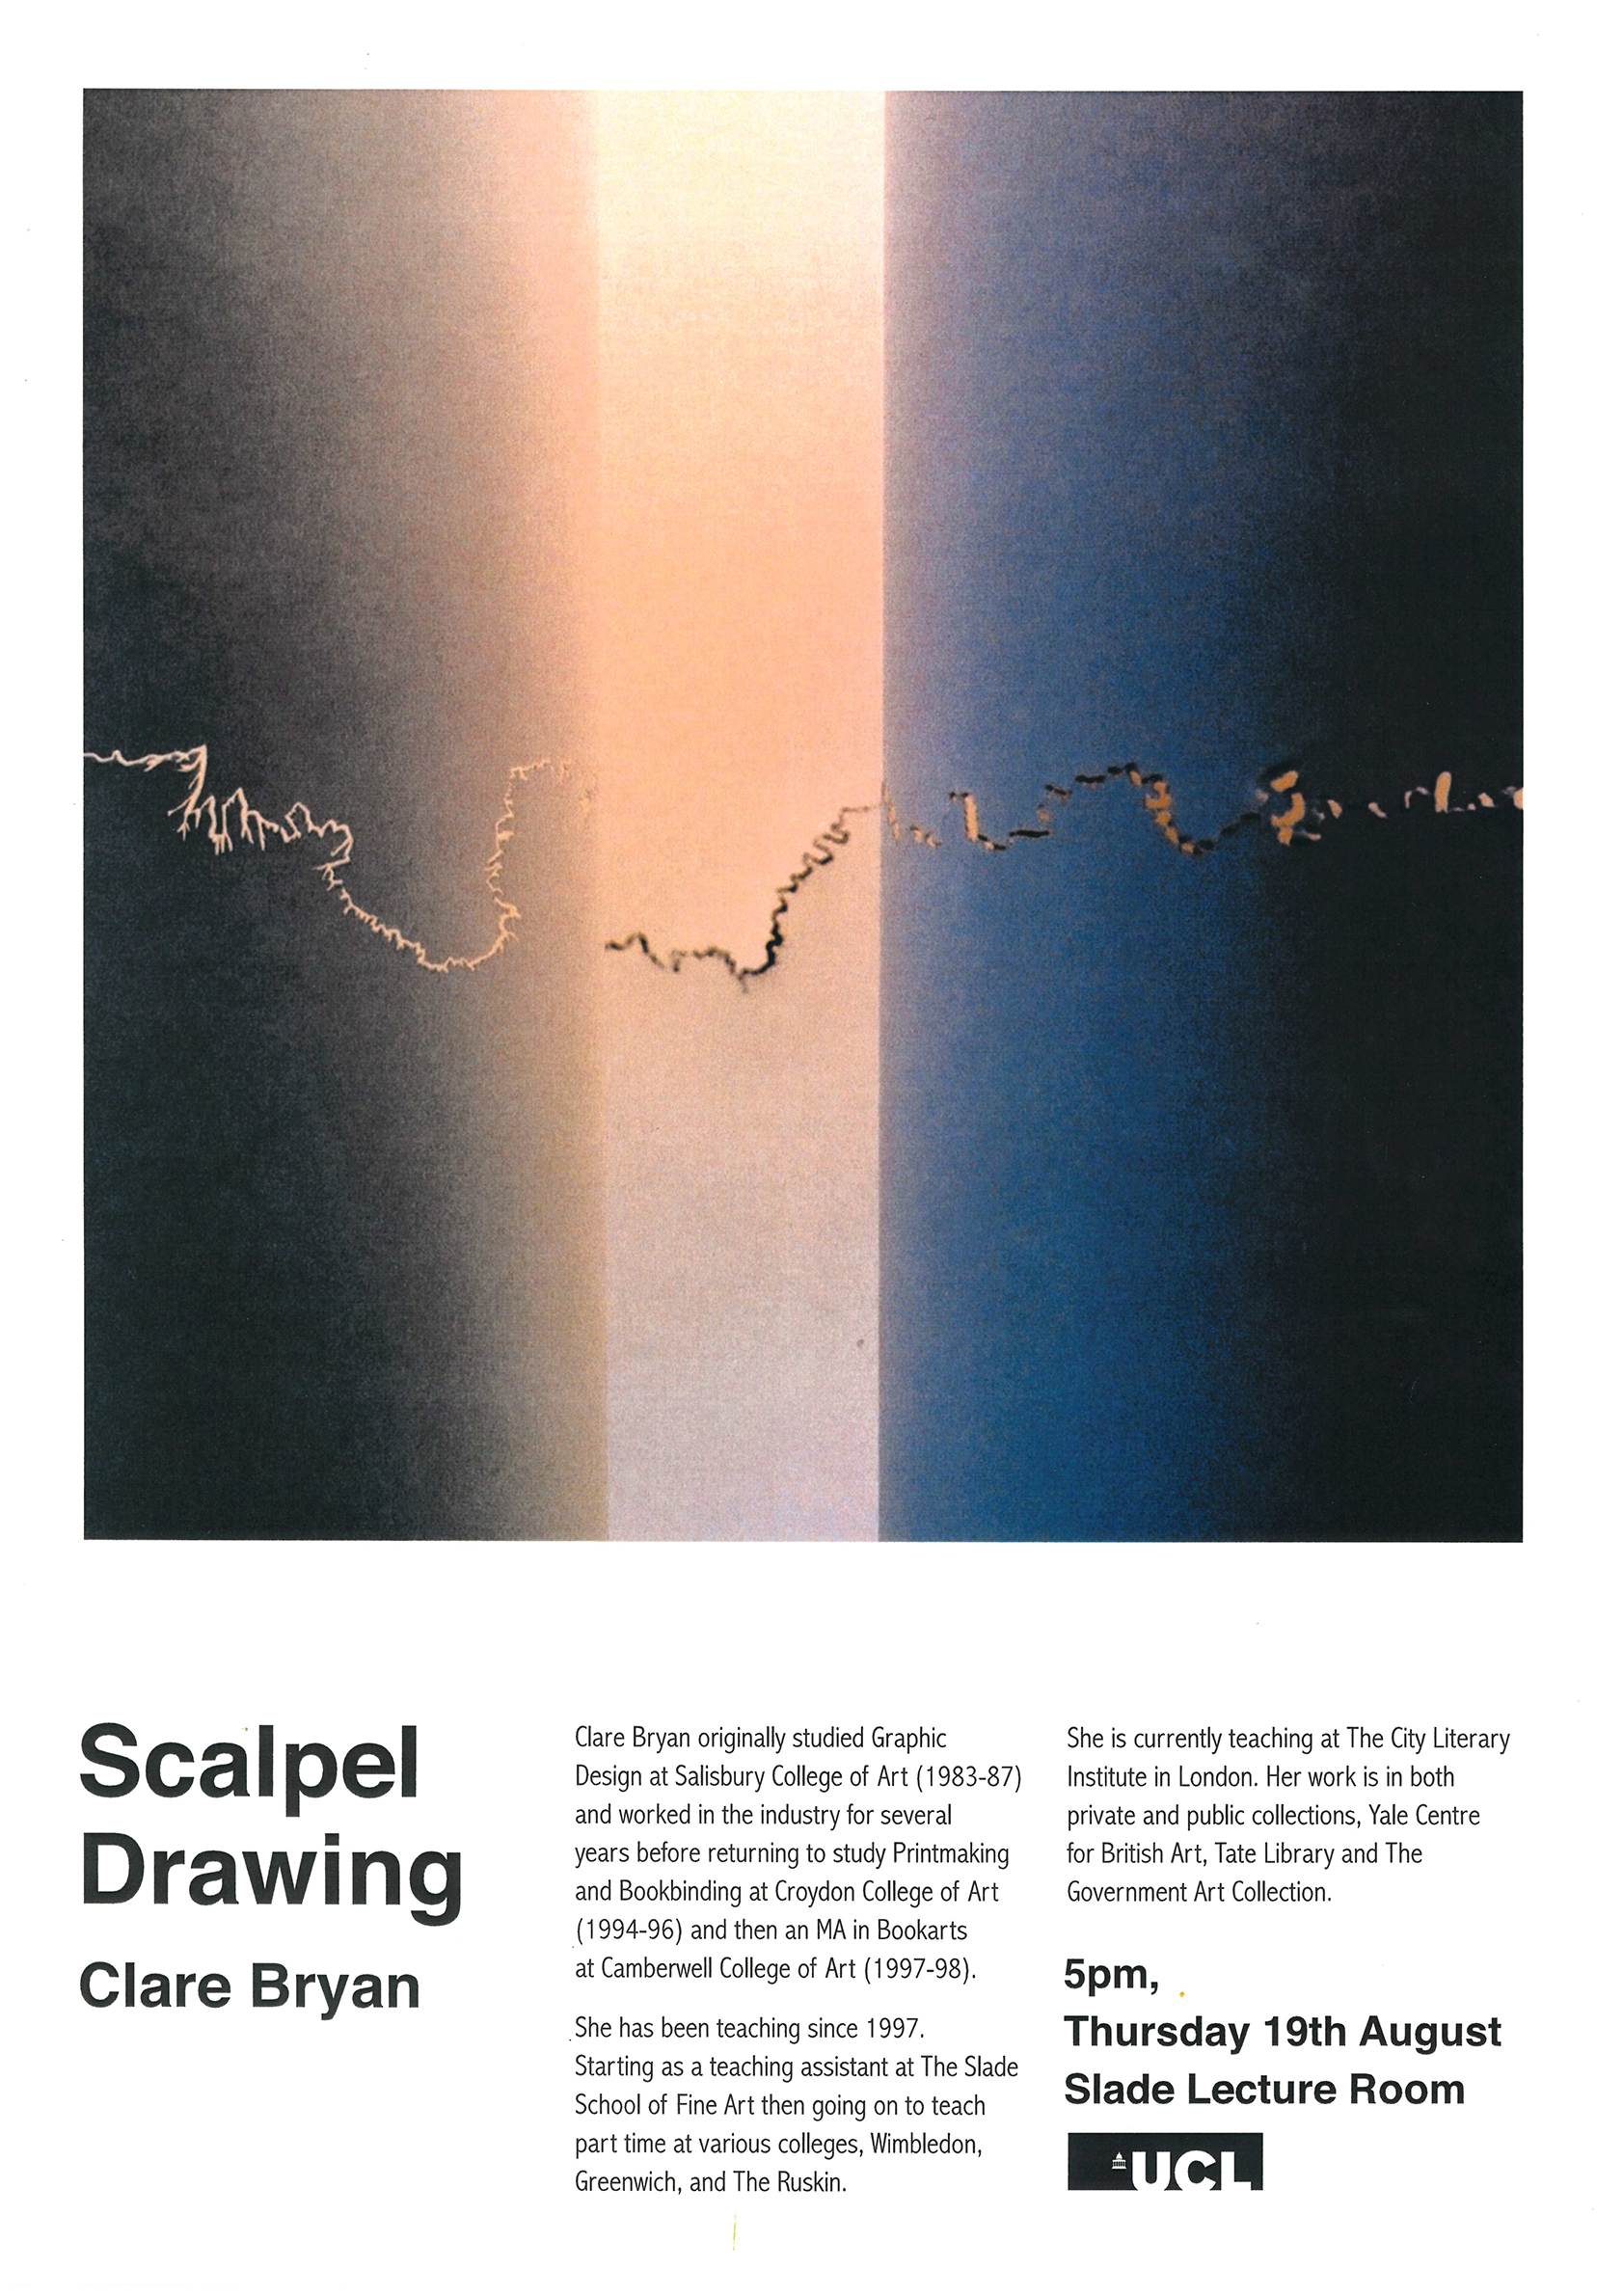 Summer School poster: Clare Bryan, Scalpel Drawing, 19 August 2010